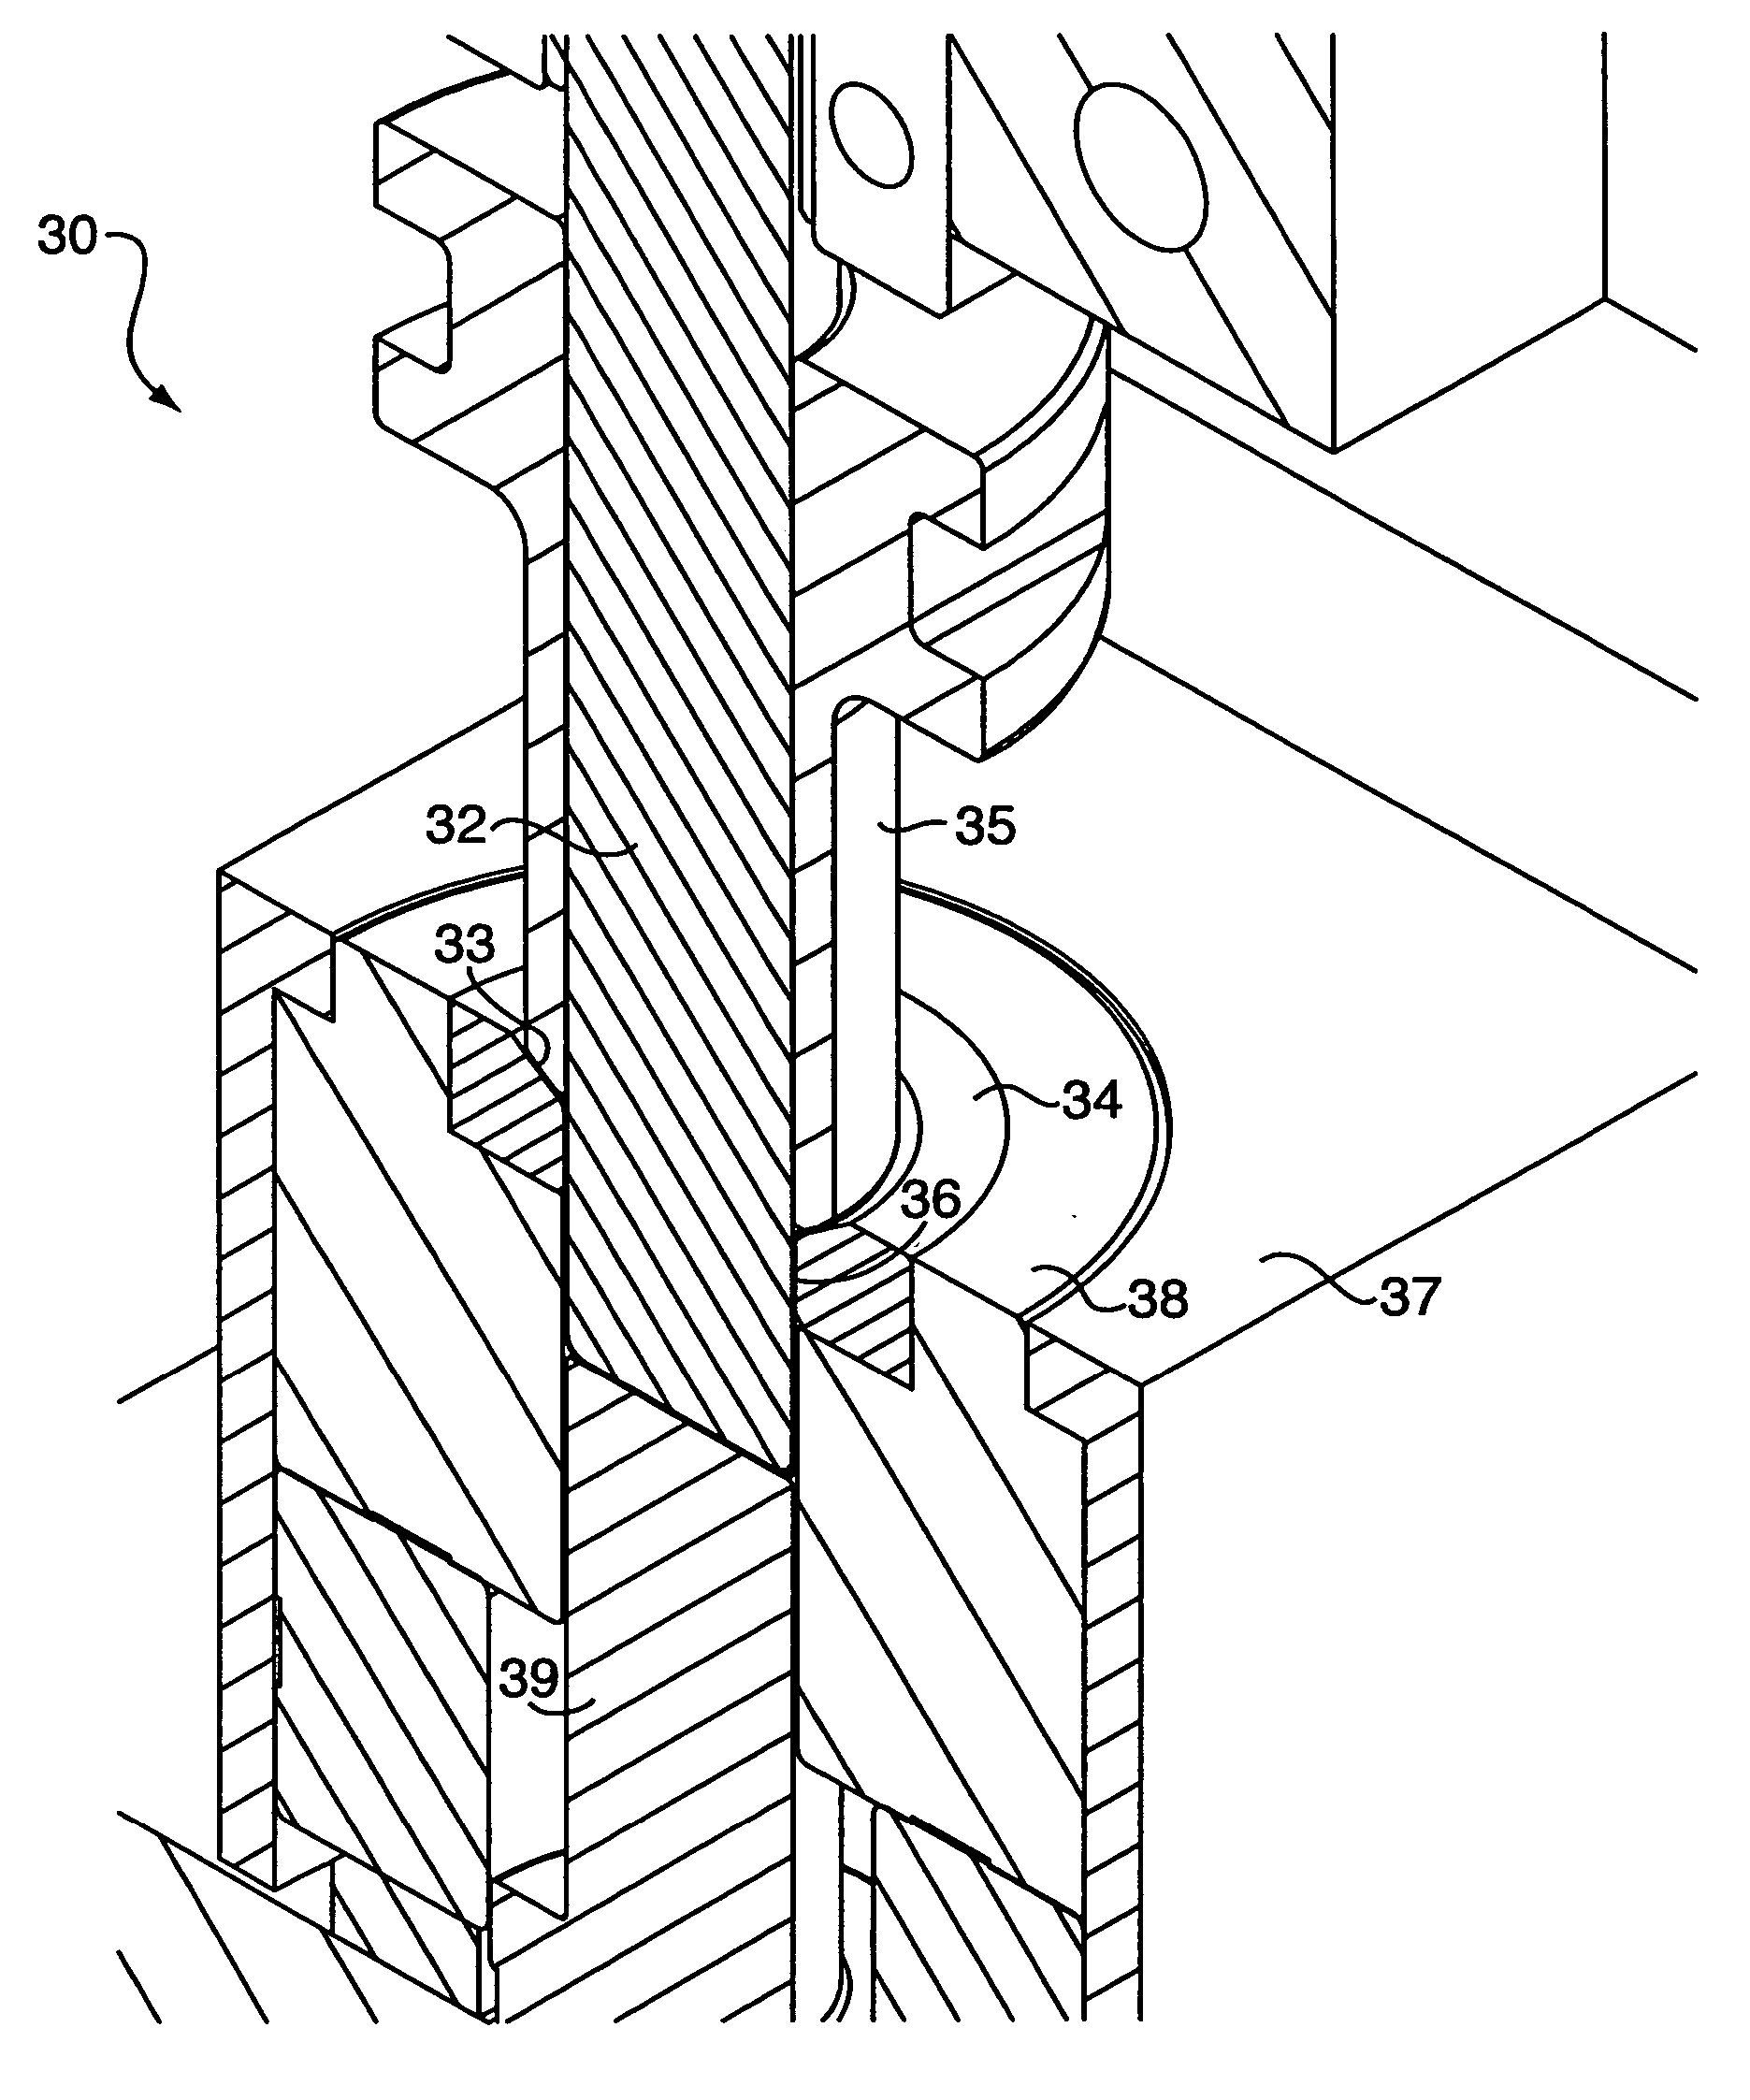 System and process for forming battery cans